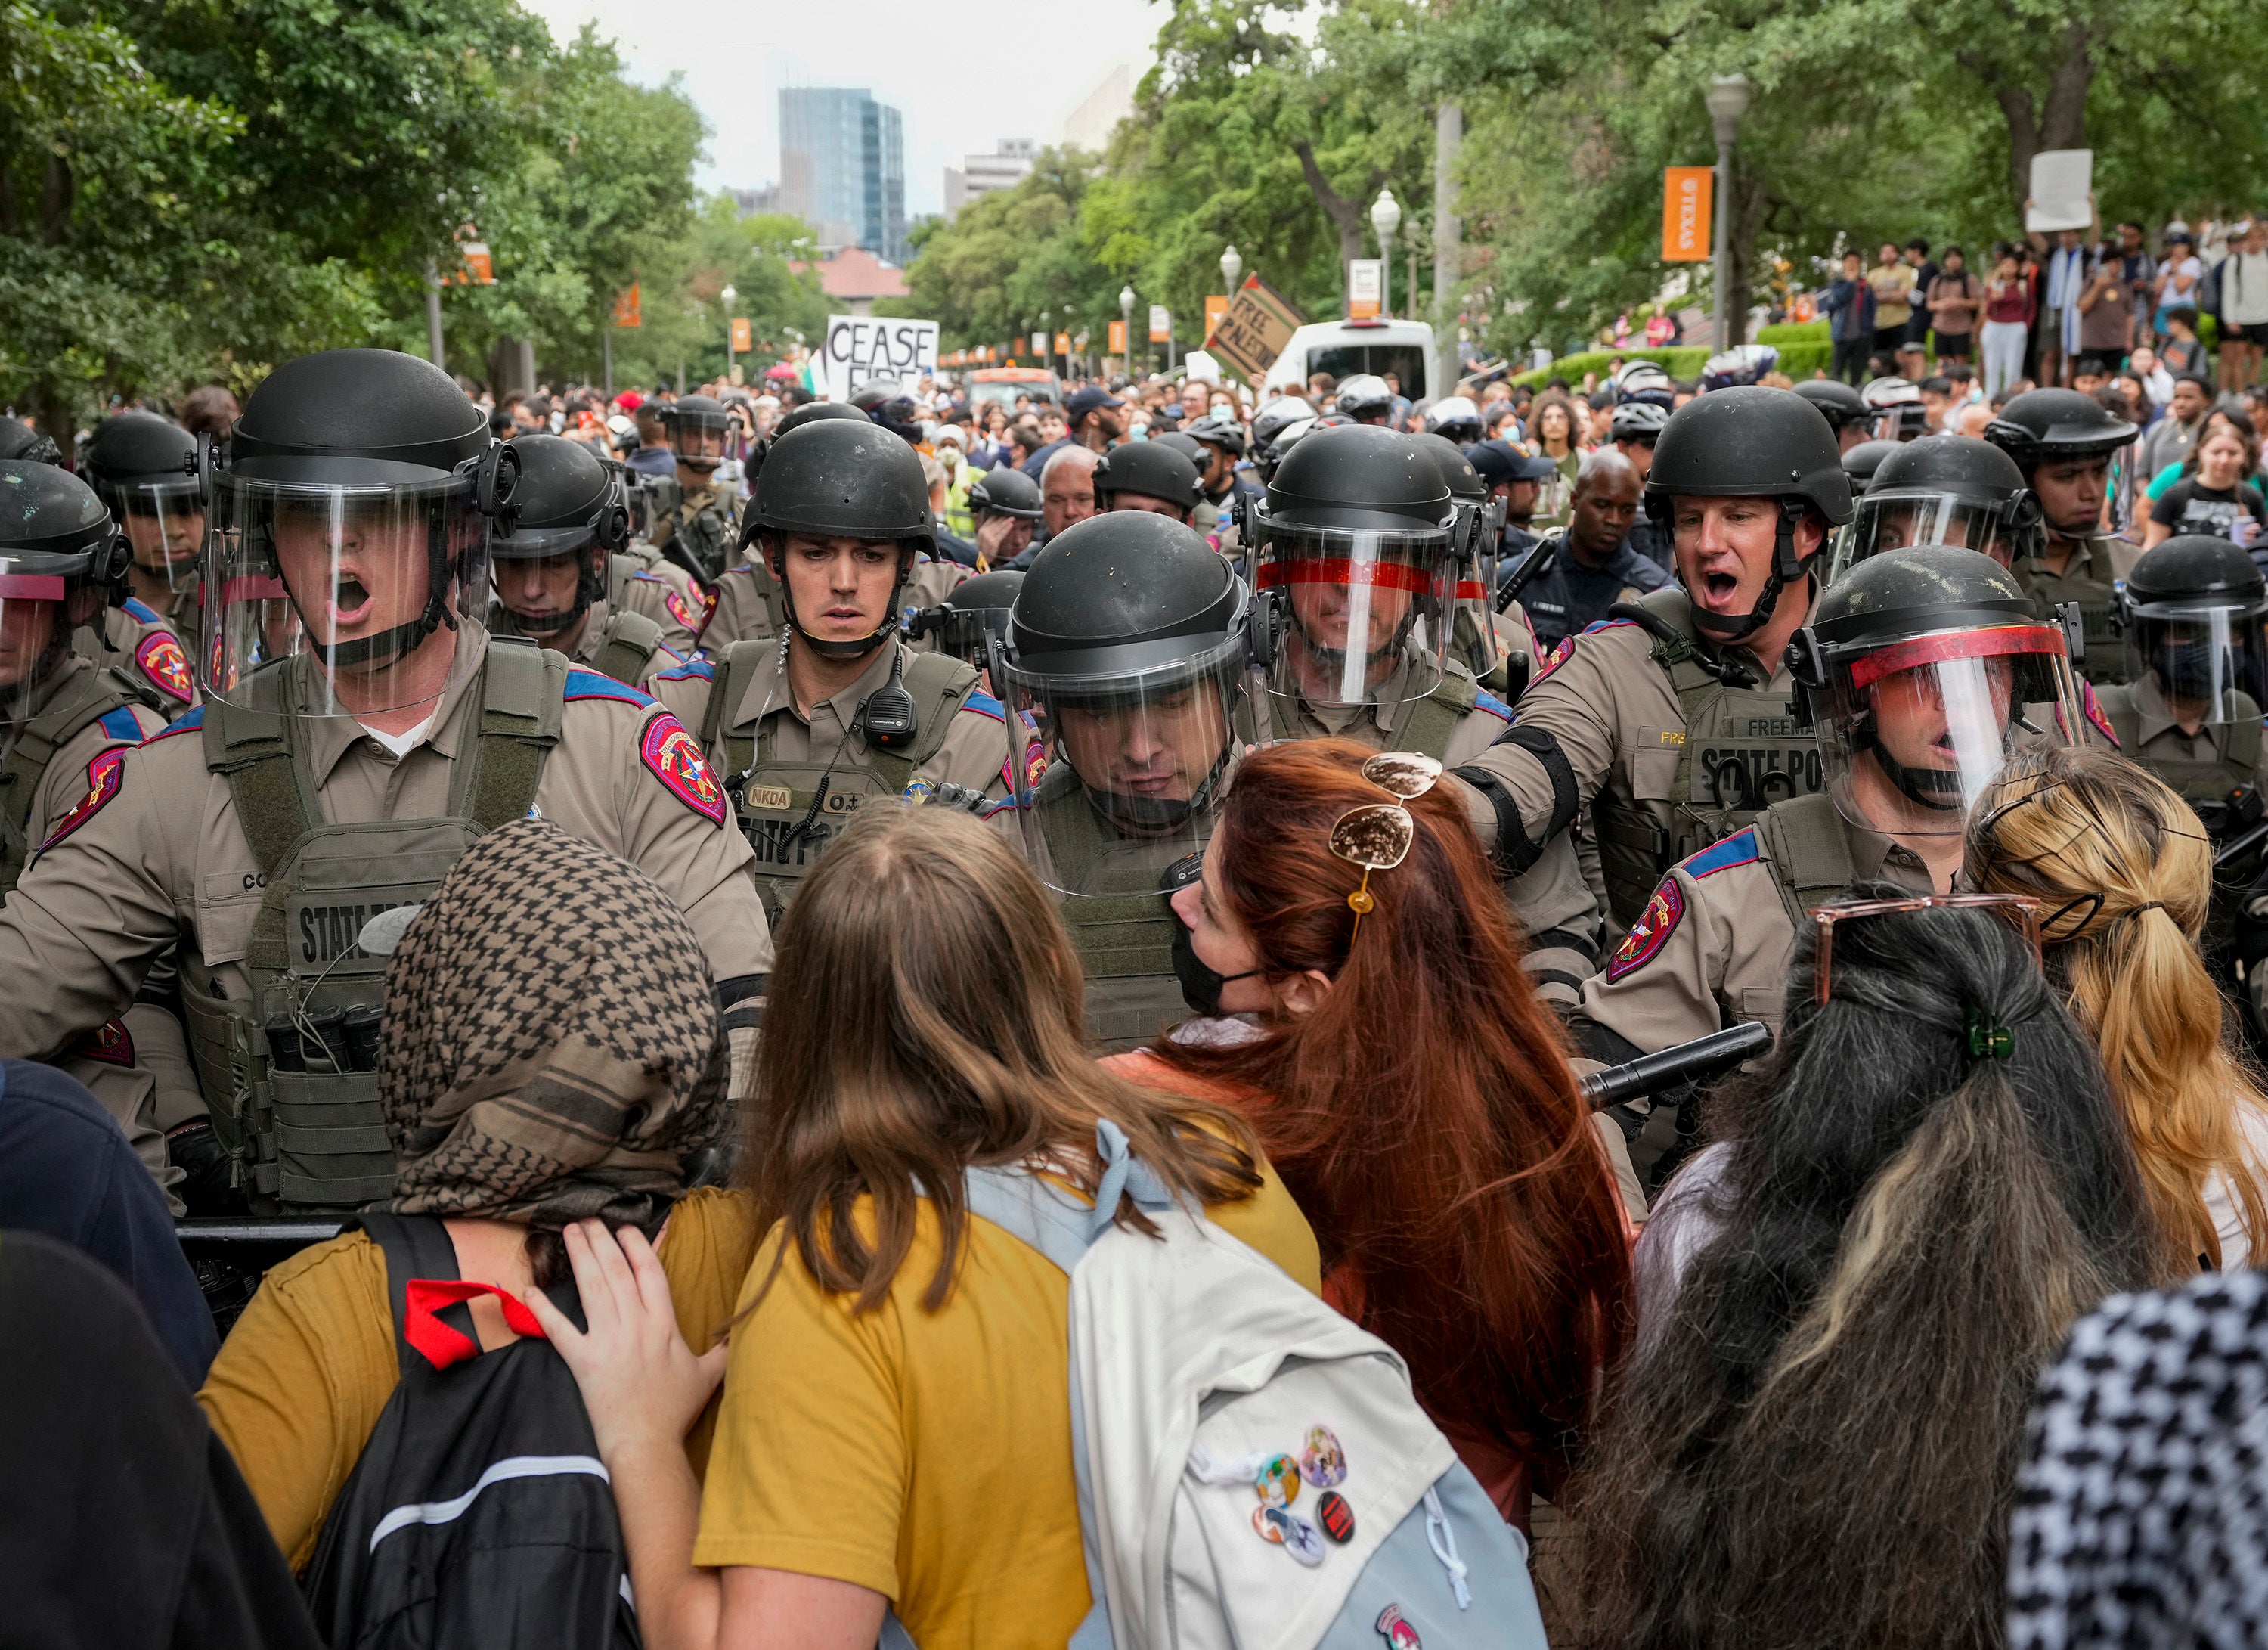 Texas state troopers cracked down on protests at UT at Austin on Wednesday on the order of Governor Greg Abbot